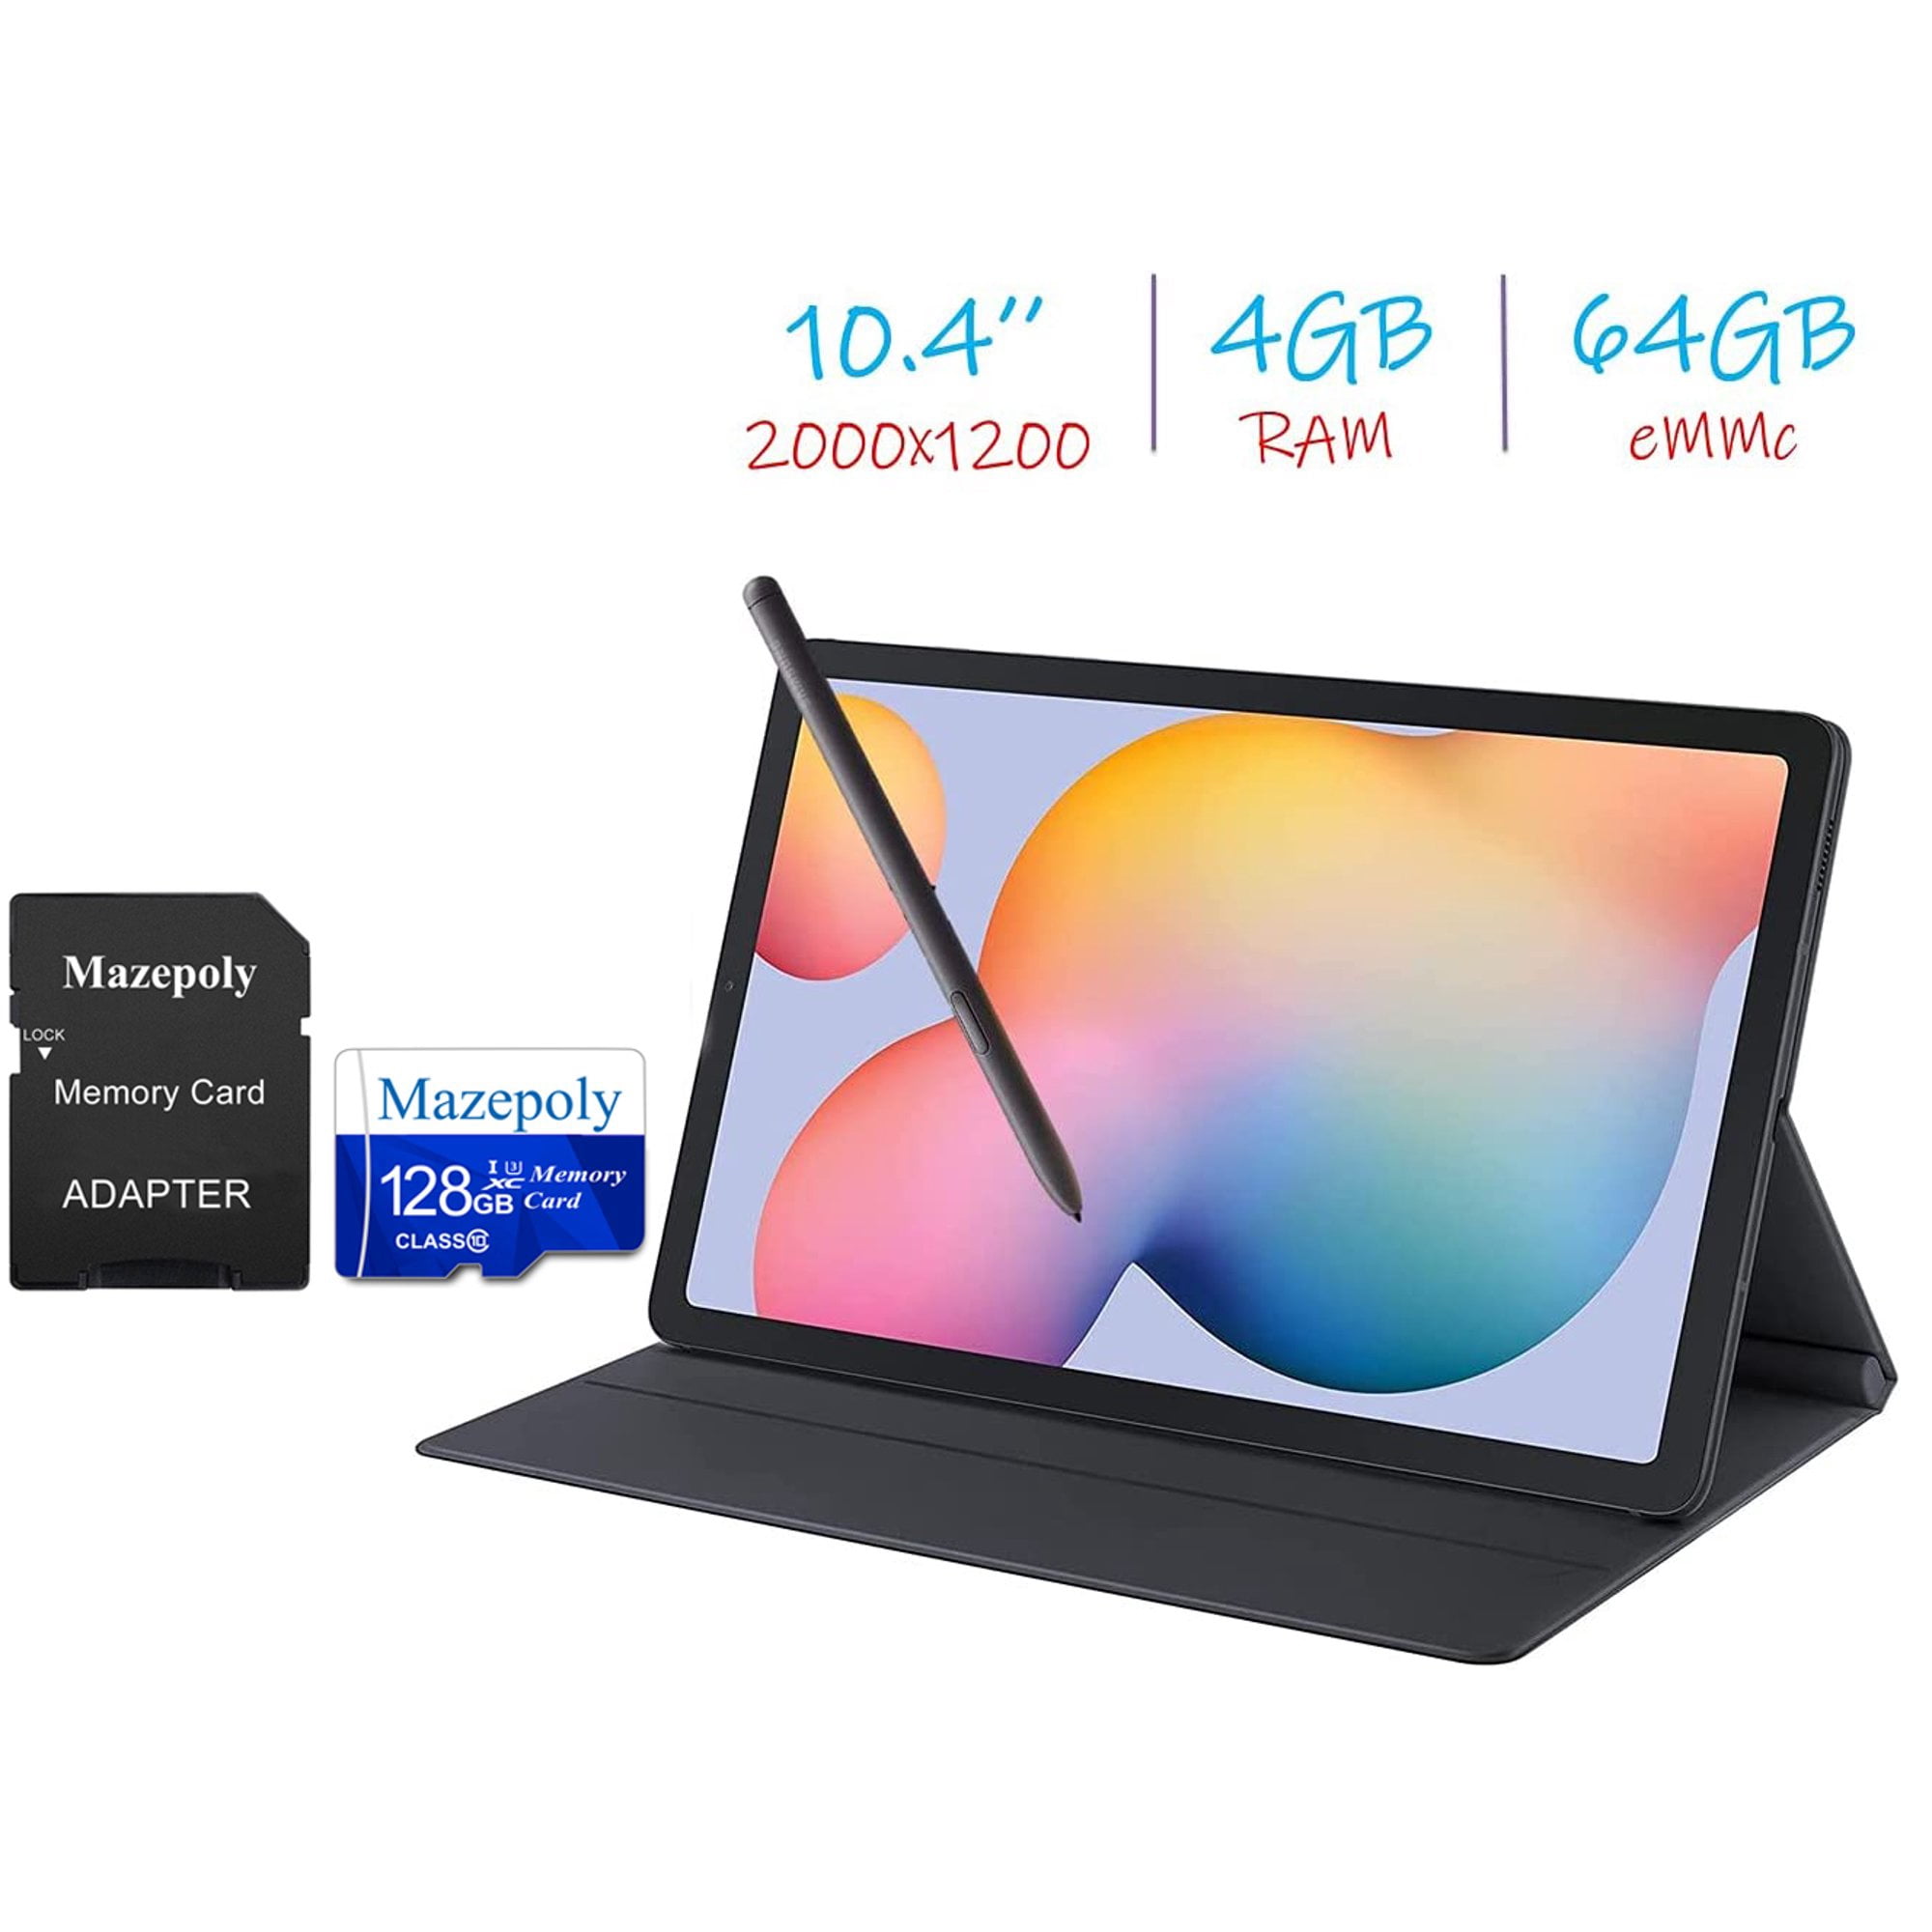 Army ø vride Samsung Galaxy Tab S6 Lite 10.4'' (2000x1200) WiFi Tablet Bundle, Exynos  9610, 4GB RAM, 64GB Storage, Bluetooth, Front & Rear Camera, Android 10, S  Pen, Tablet Cover with Mazepoly Accessories - Walmart.com